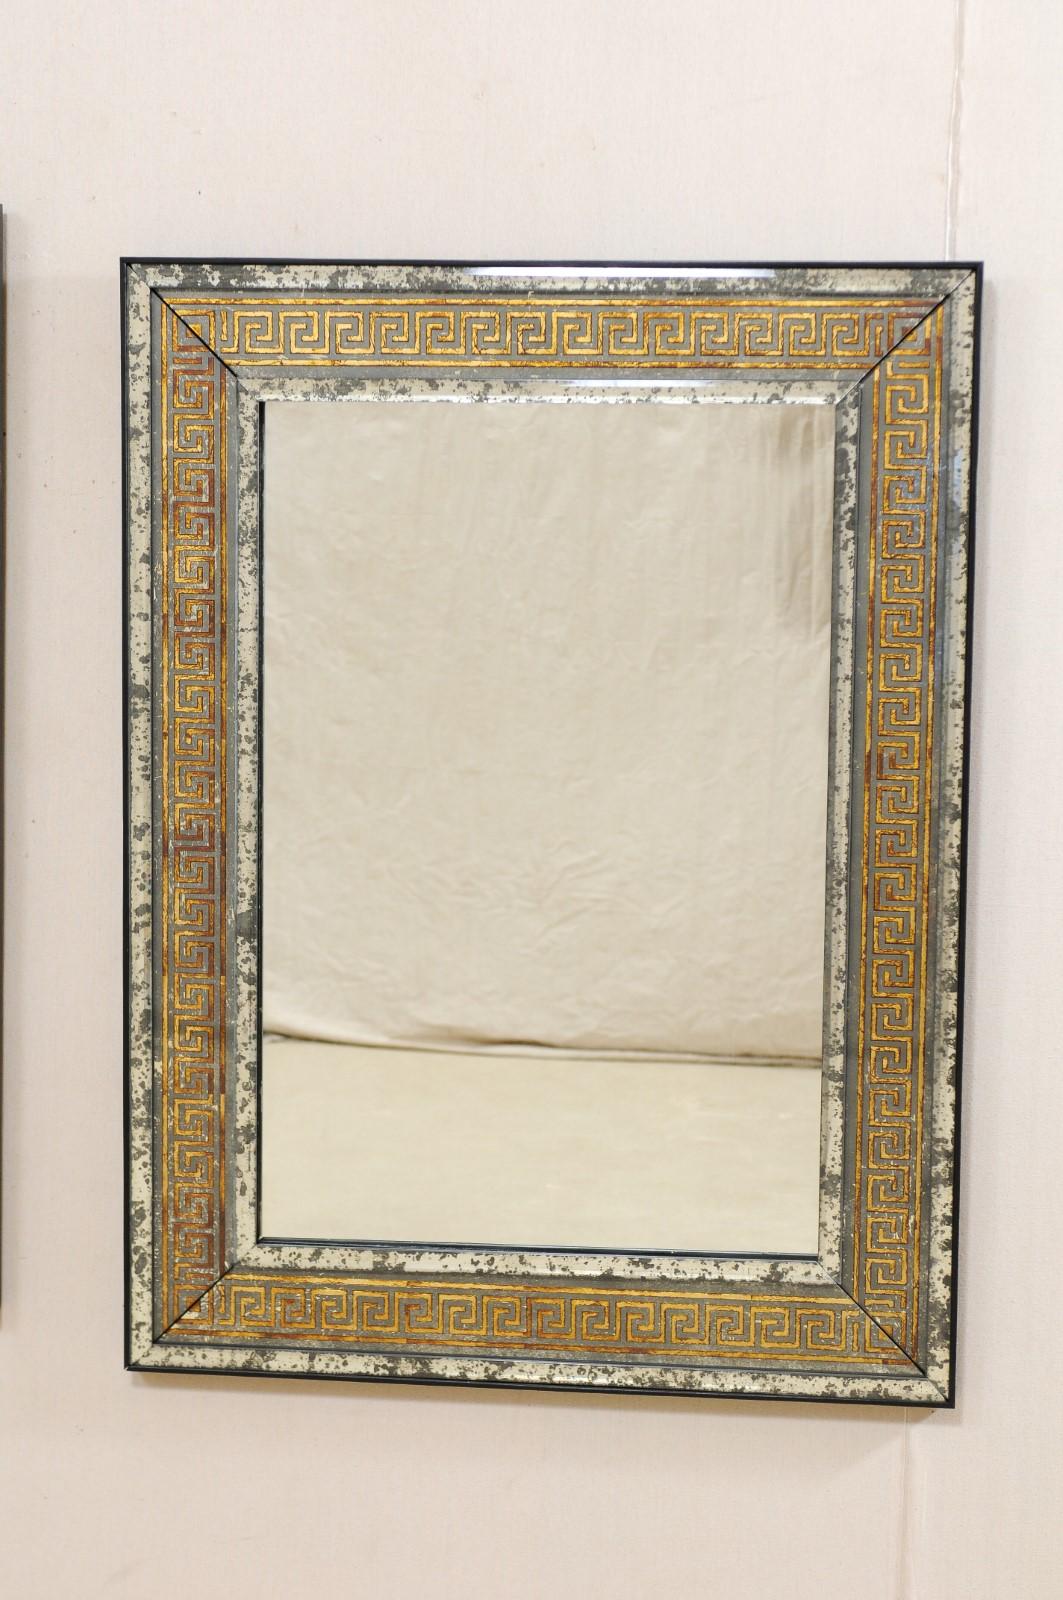 A pair of artisan made Greek key mirrors. This nice sized pair of rectangular-shaped mirrors Stand approximately just over 4 feet in height. They are artisan made with clean, antiqued-mirror inner and outer surrounds, with a gold verre églomisé